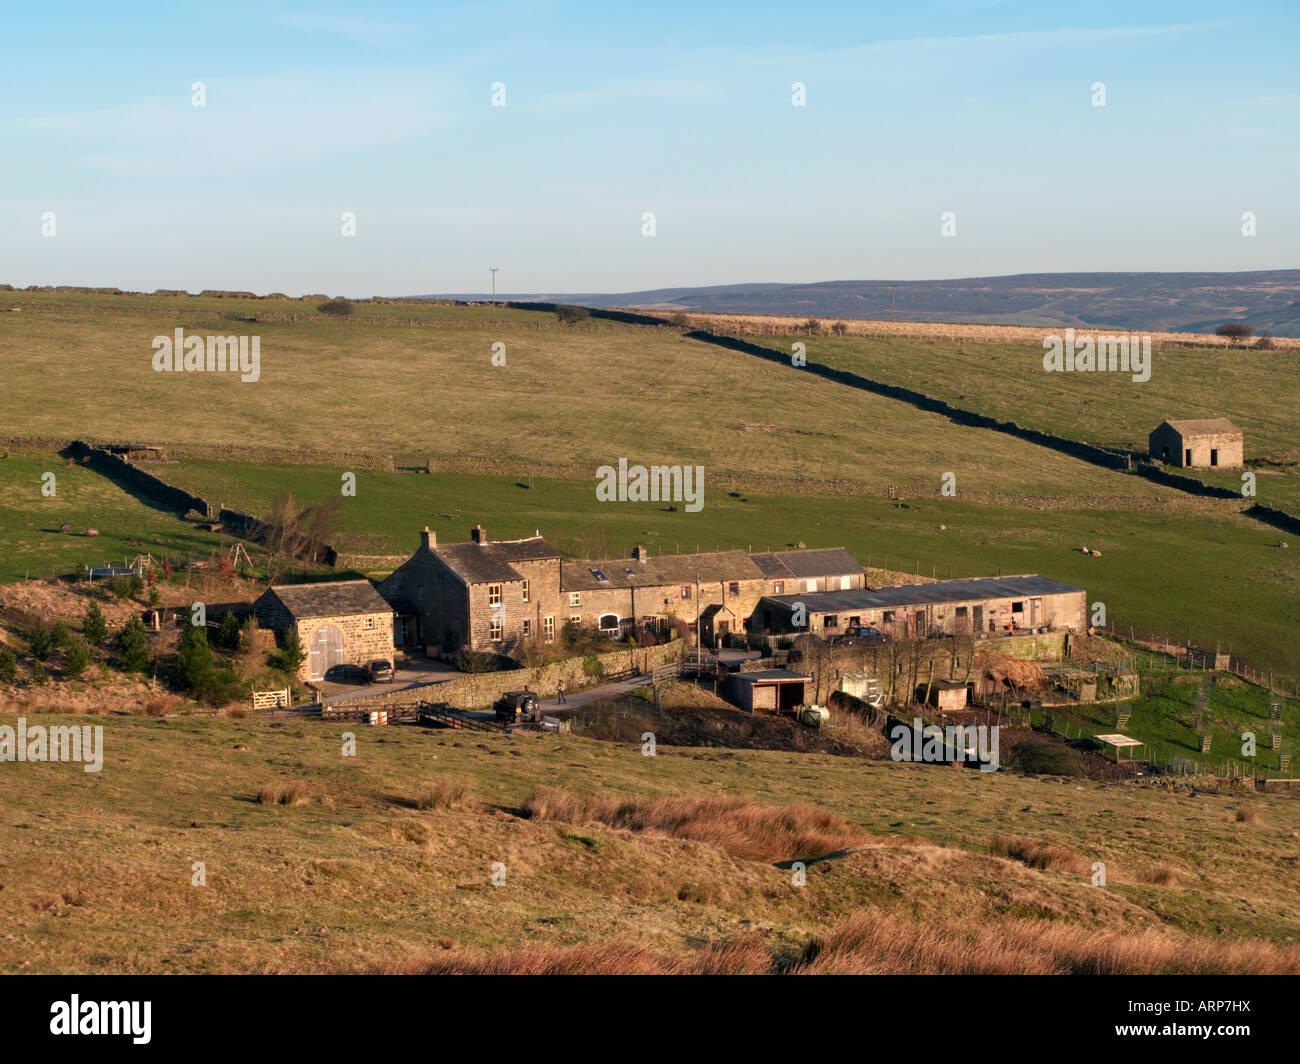 PEAT LANE, GREENHOW, NIDDERDALE, N YORKS, UK. 12th Feb 2008. Farm and bar conversion and development in Moorhouses Valley, Stock Photo